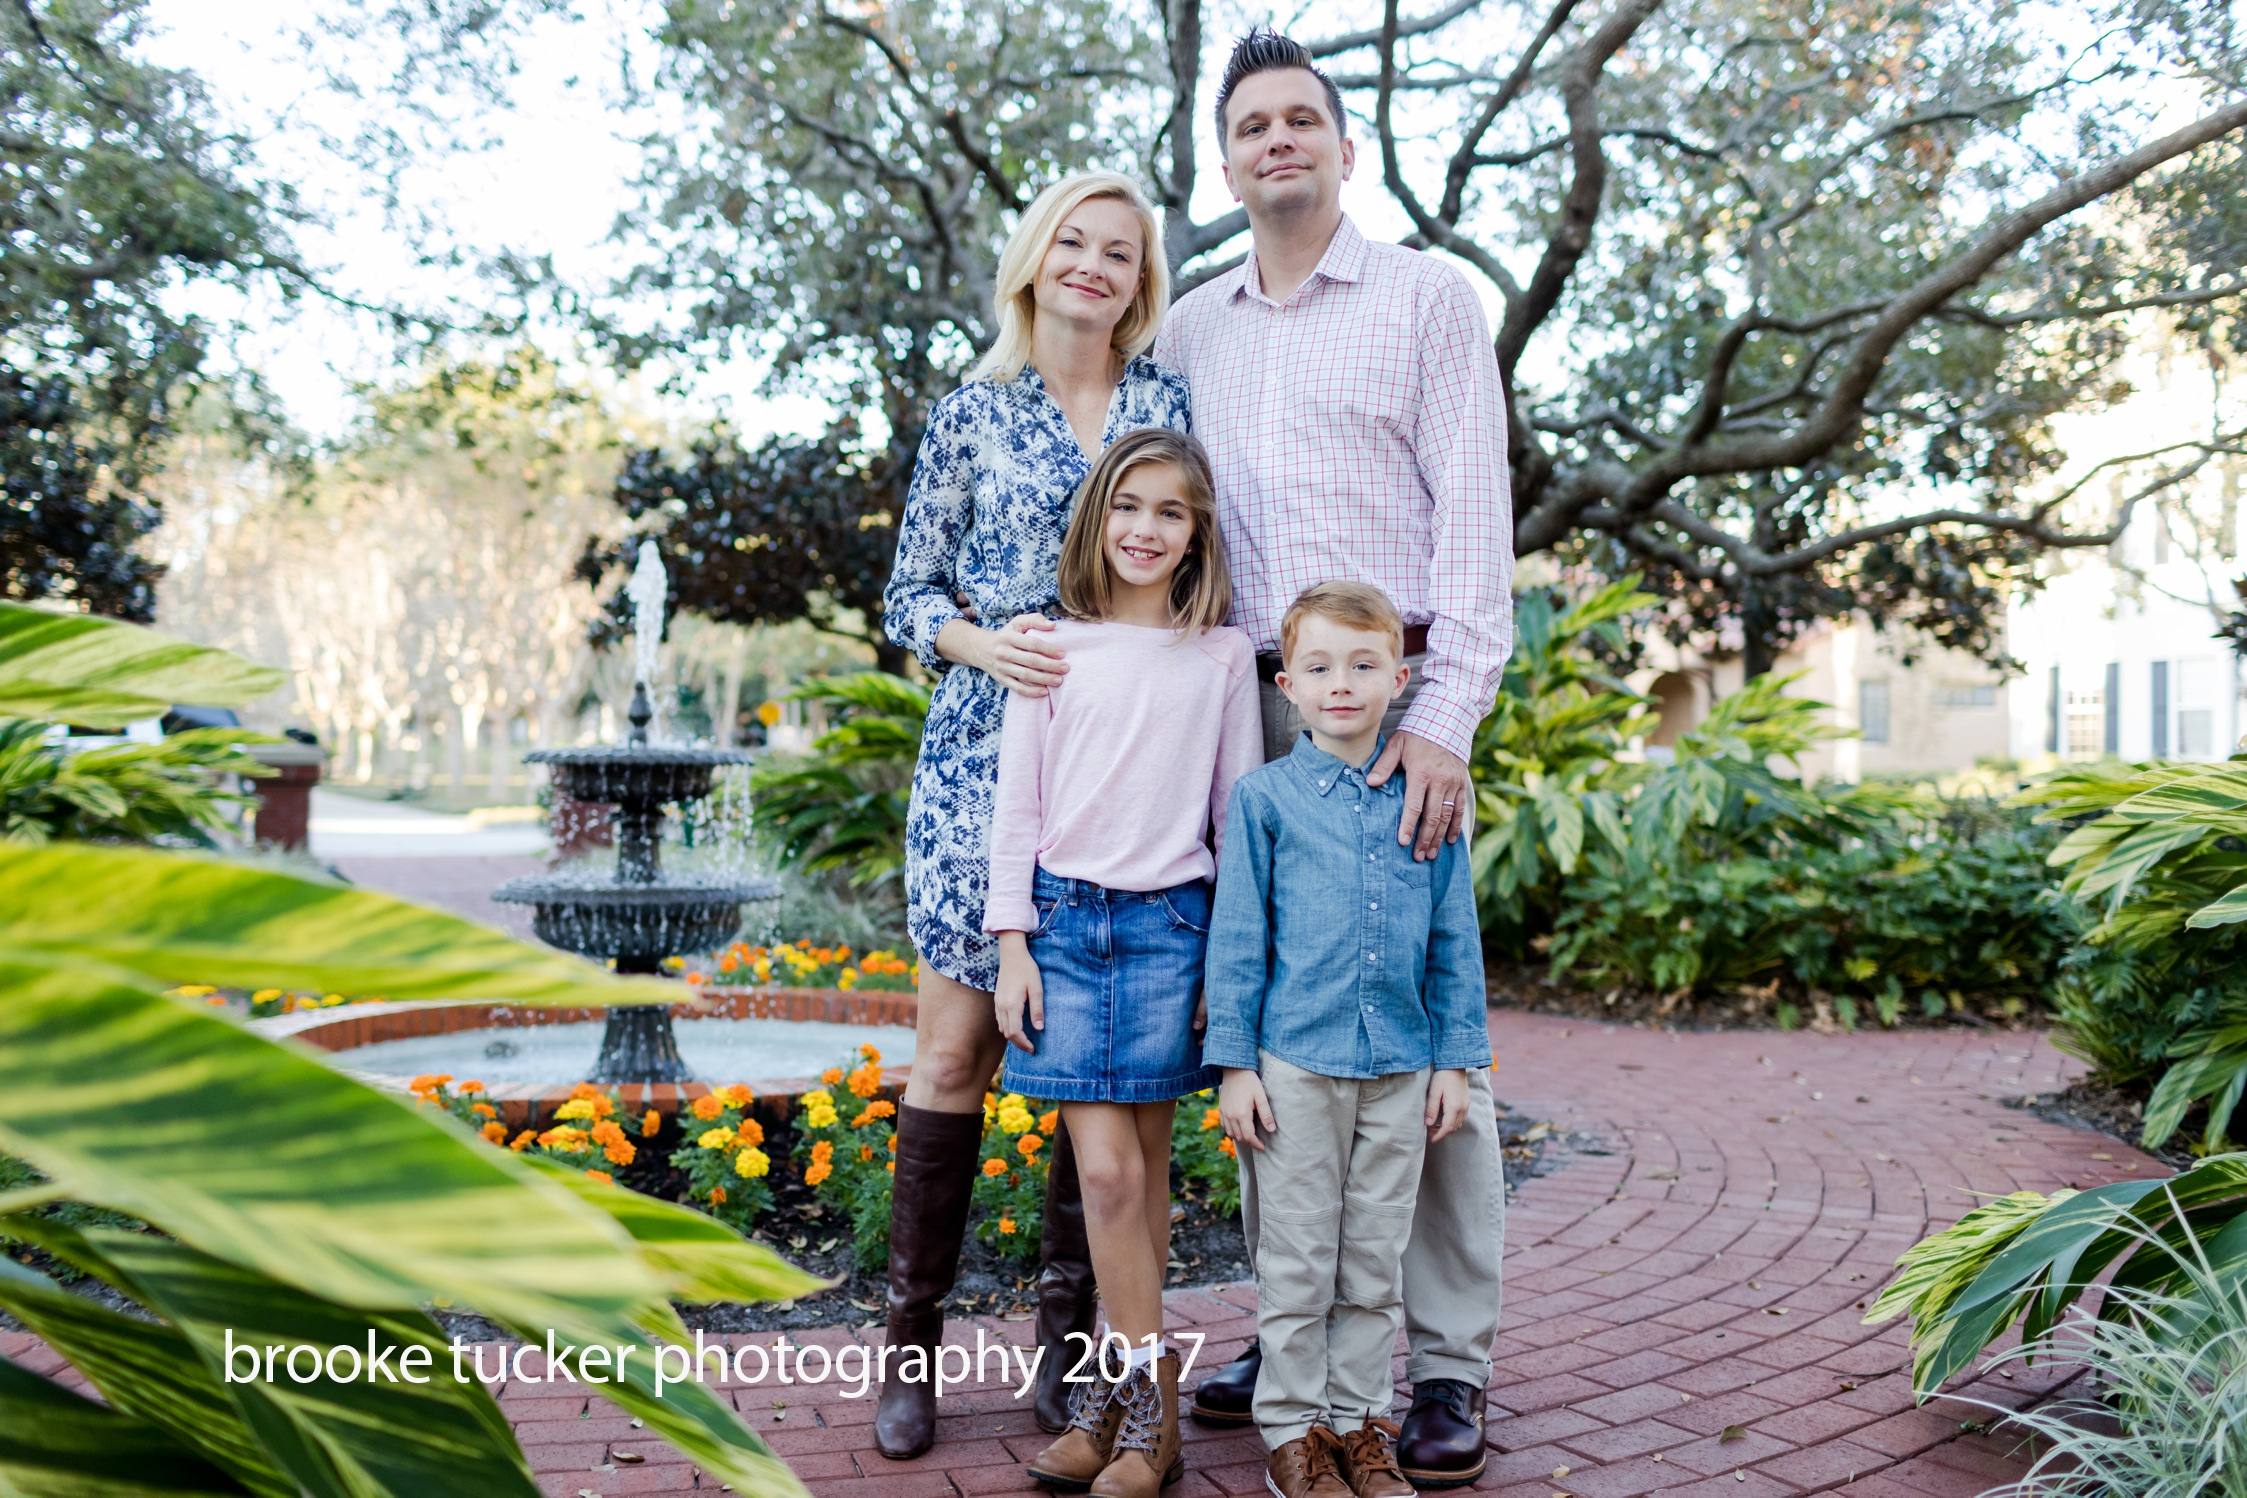 Florida child and family photographer Brooke Tucker,beautiful sun filled outdoor lifestyle family portraits